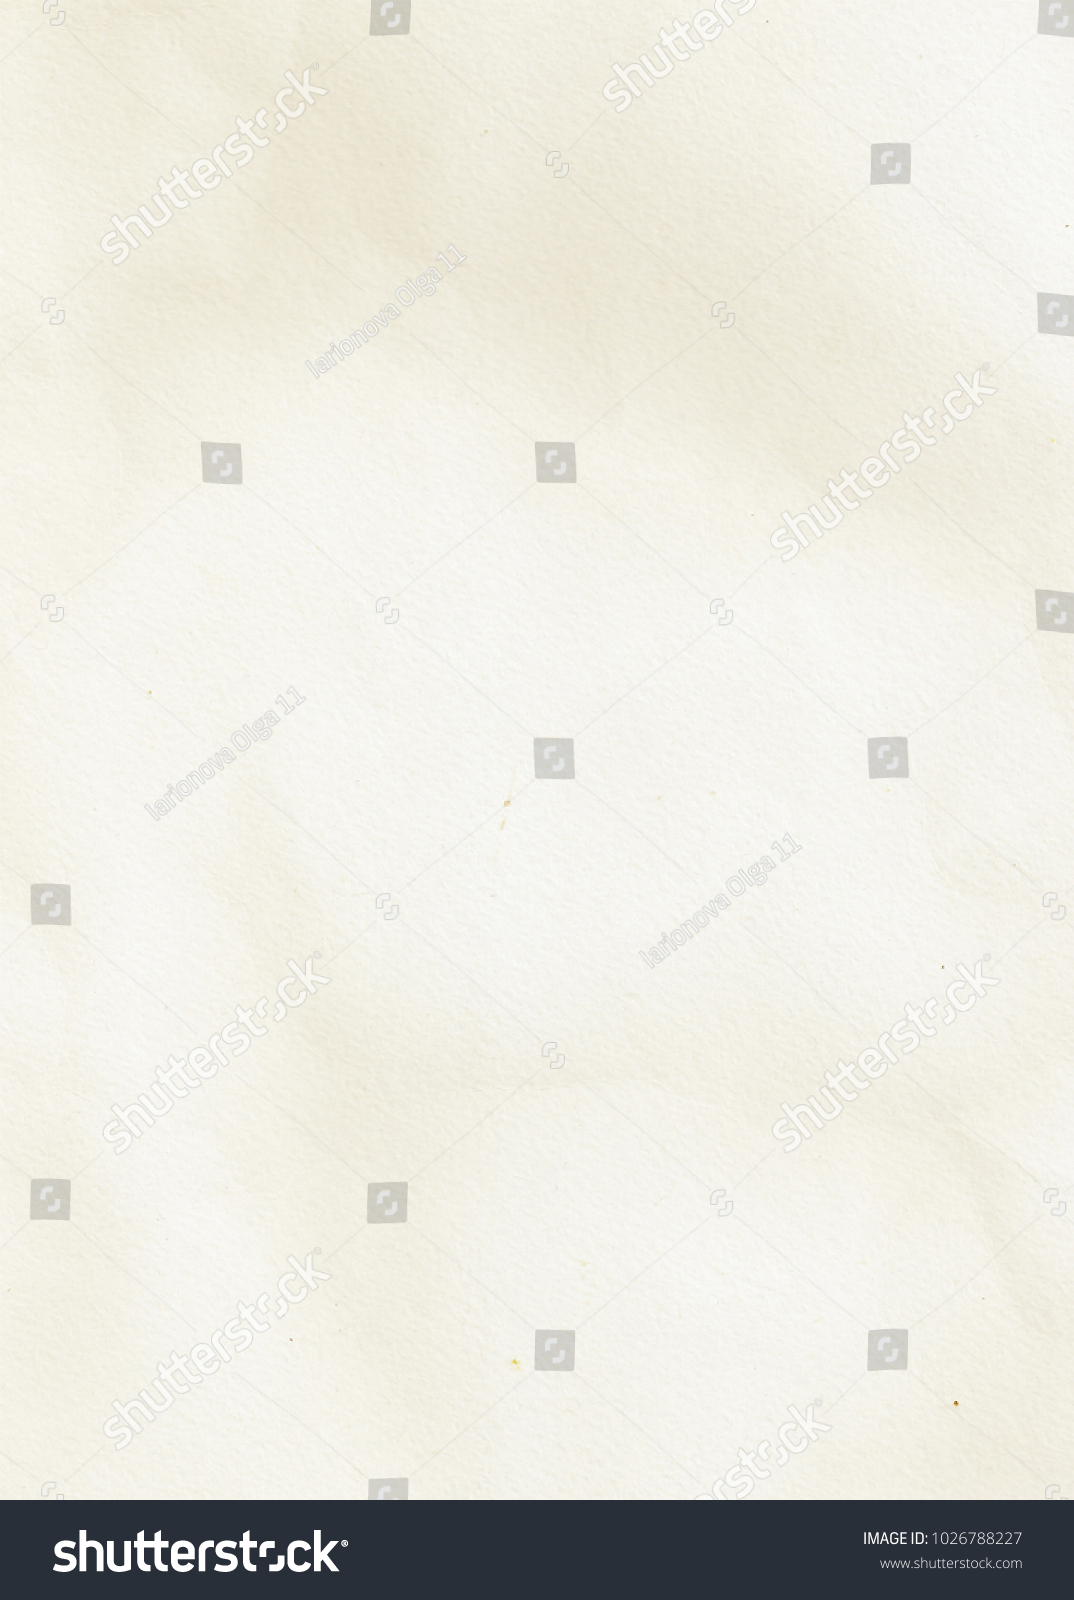 Sheet paper background #1026788227